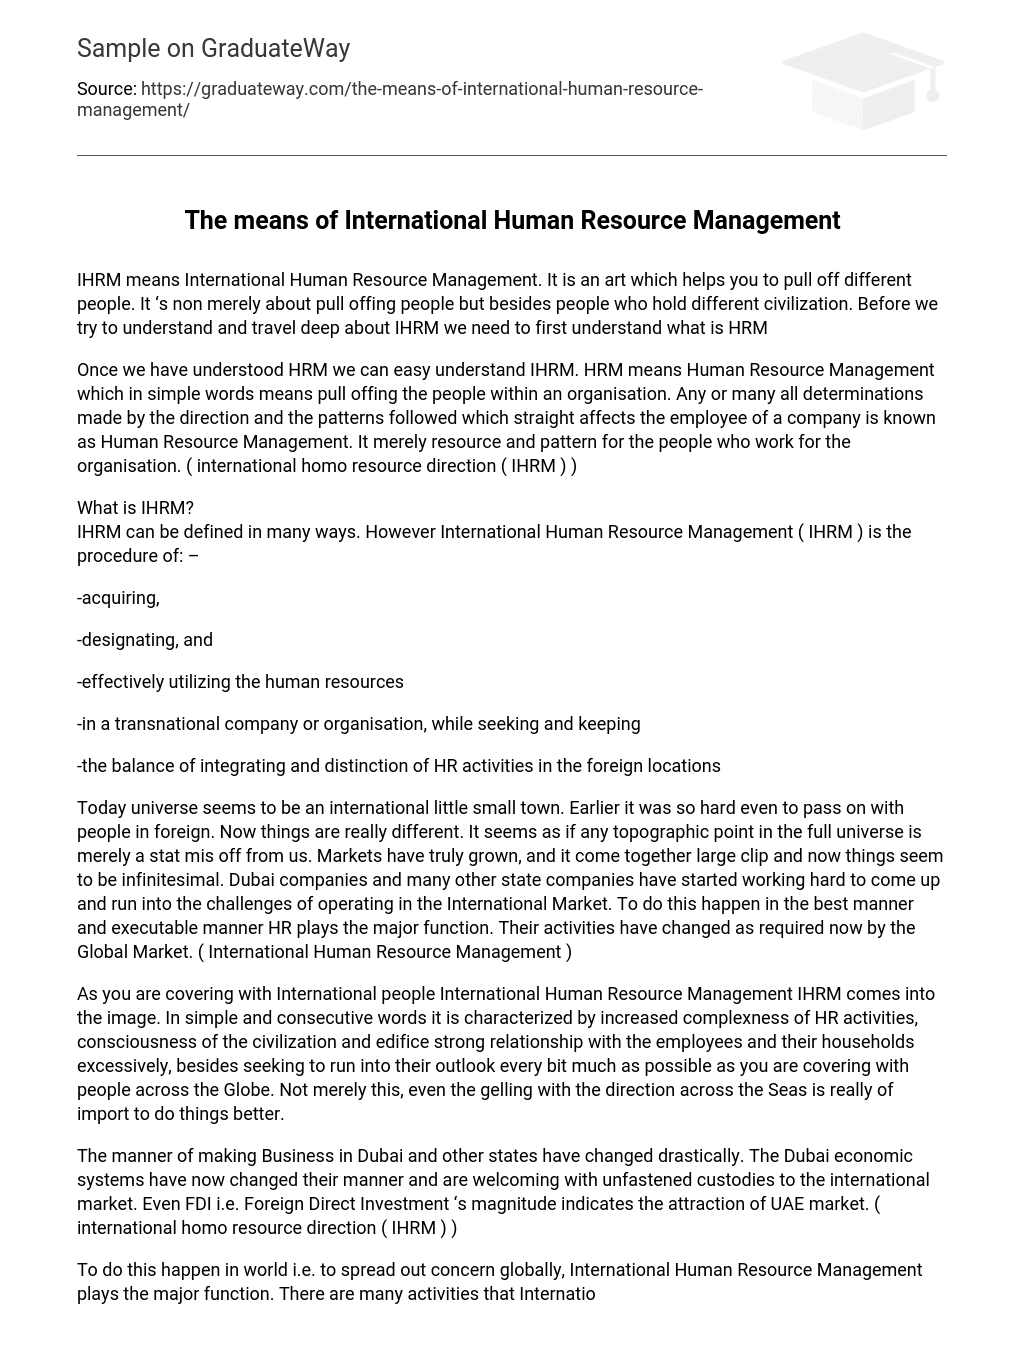 The Means of International Human Resource Management